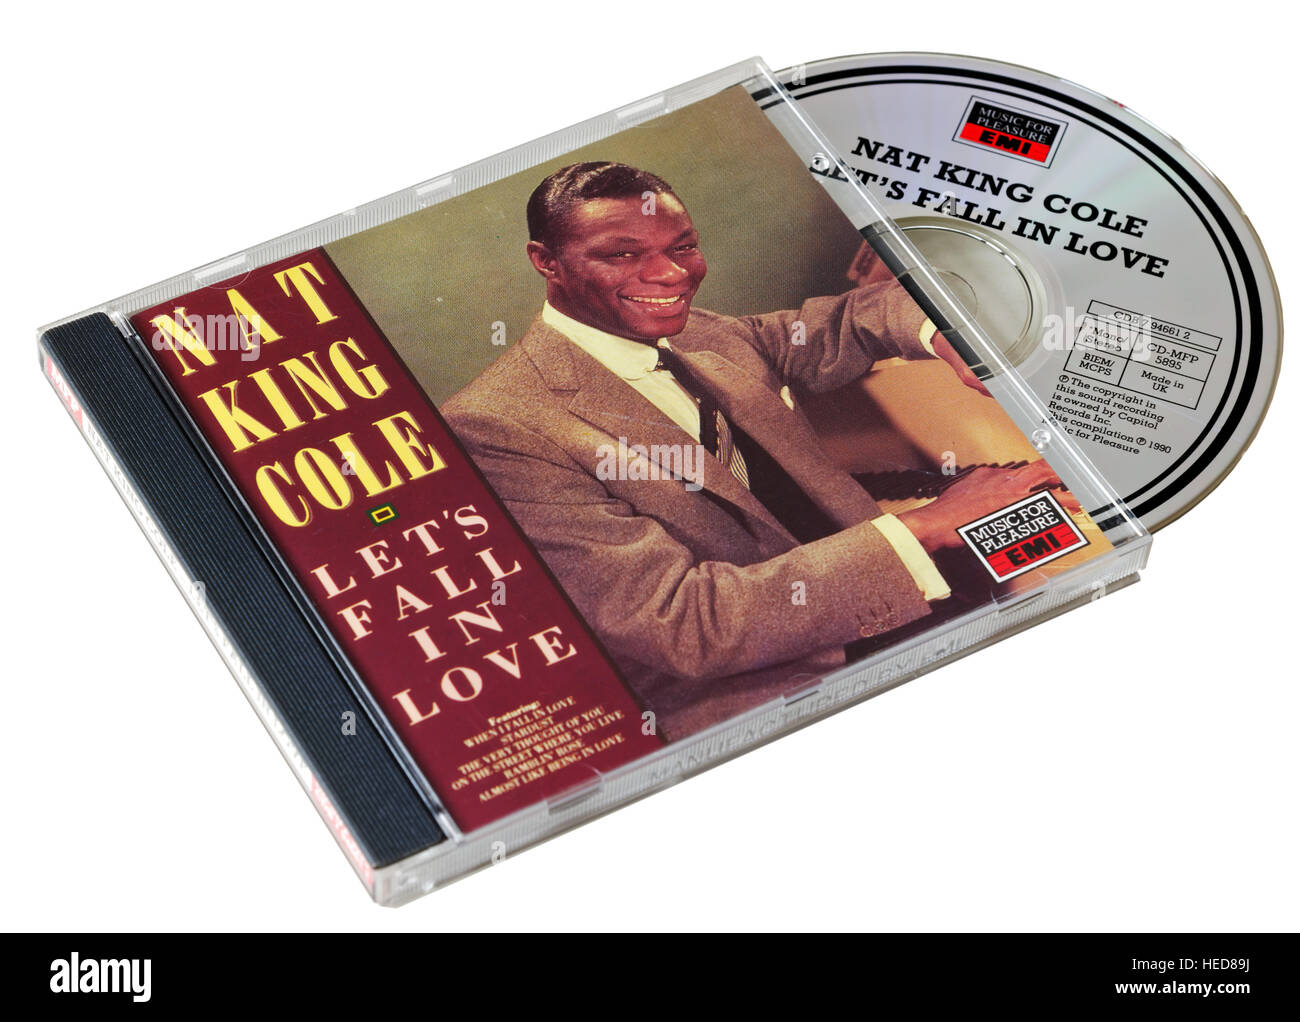 Nat King Cole Let's Fall in Love CD Stock Photo